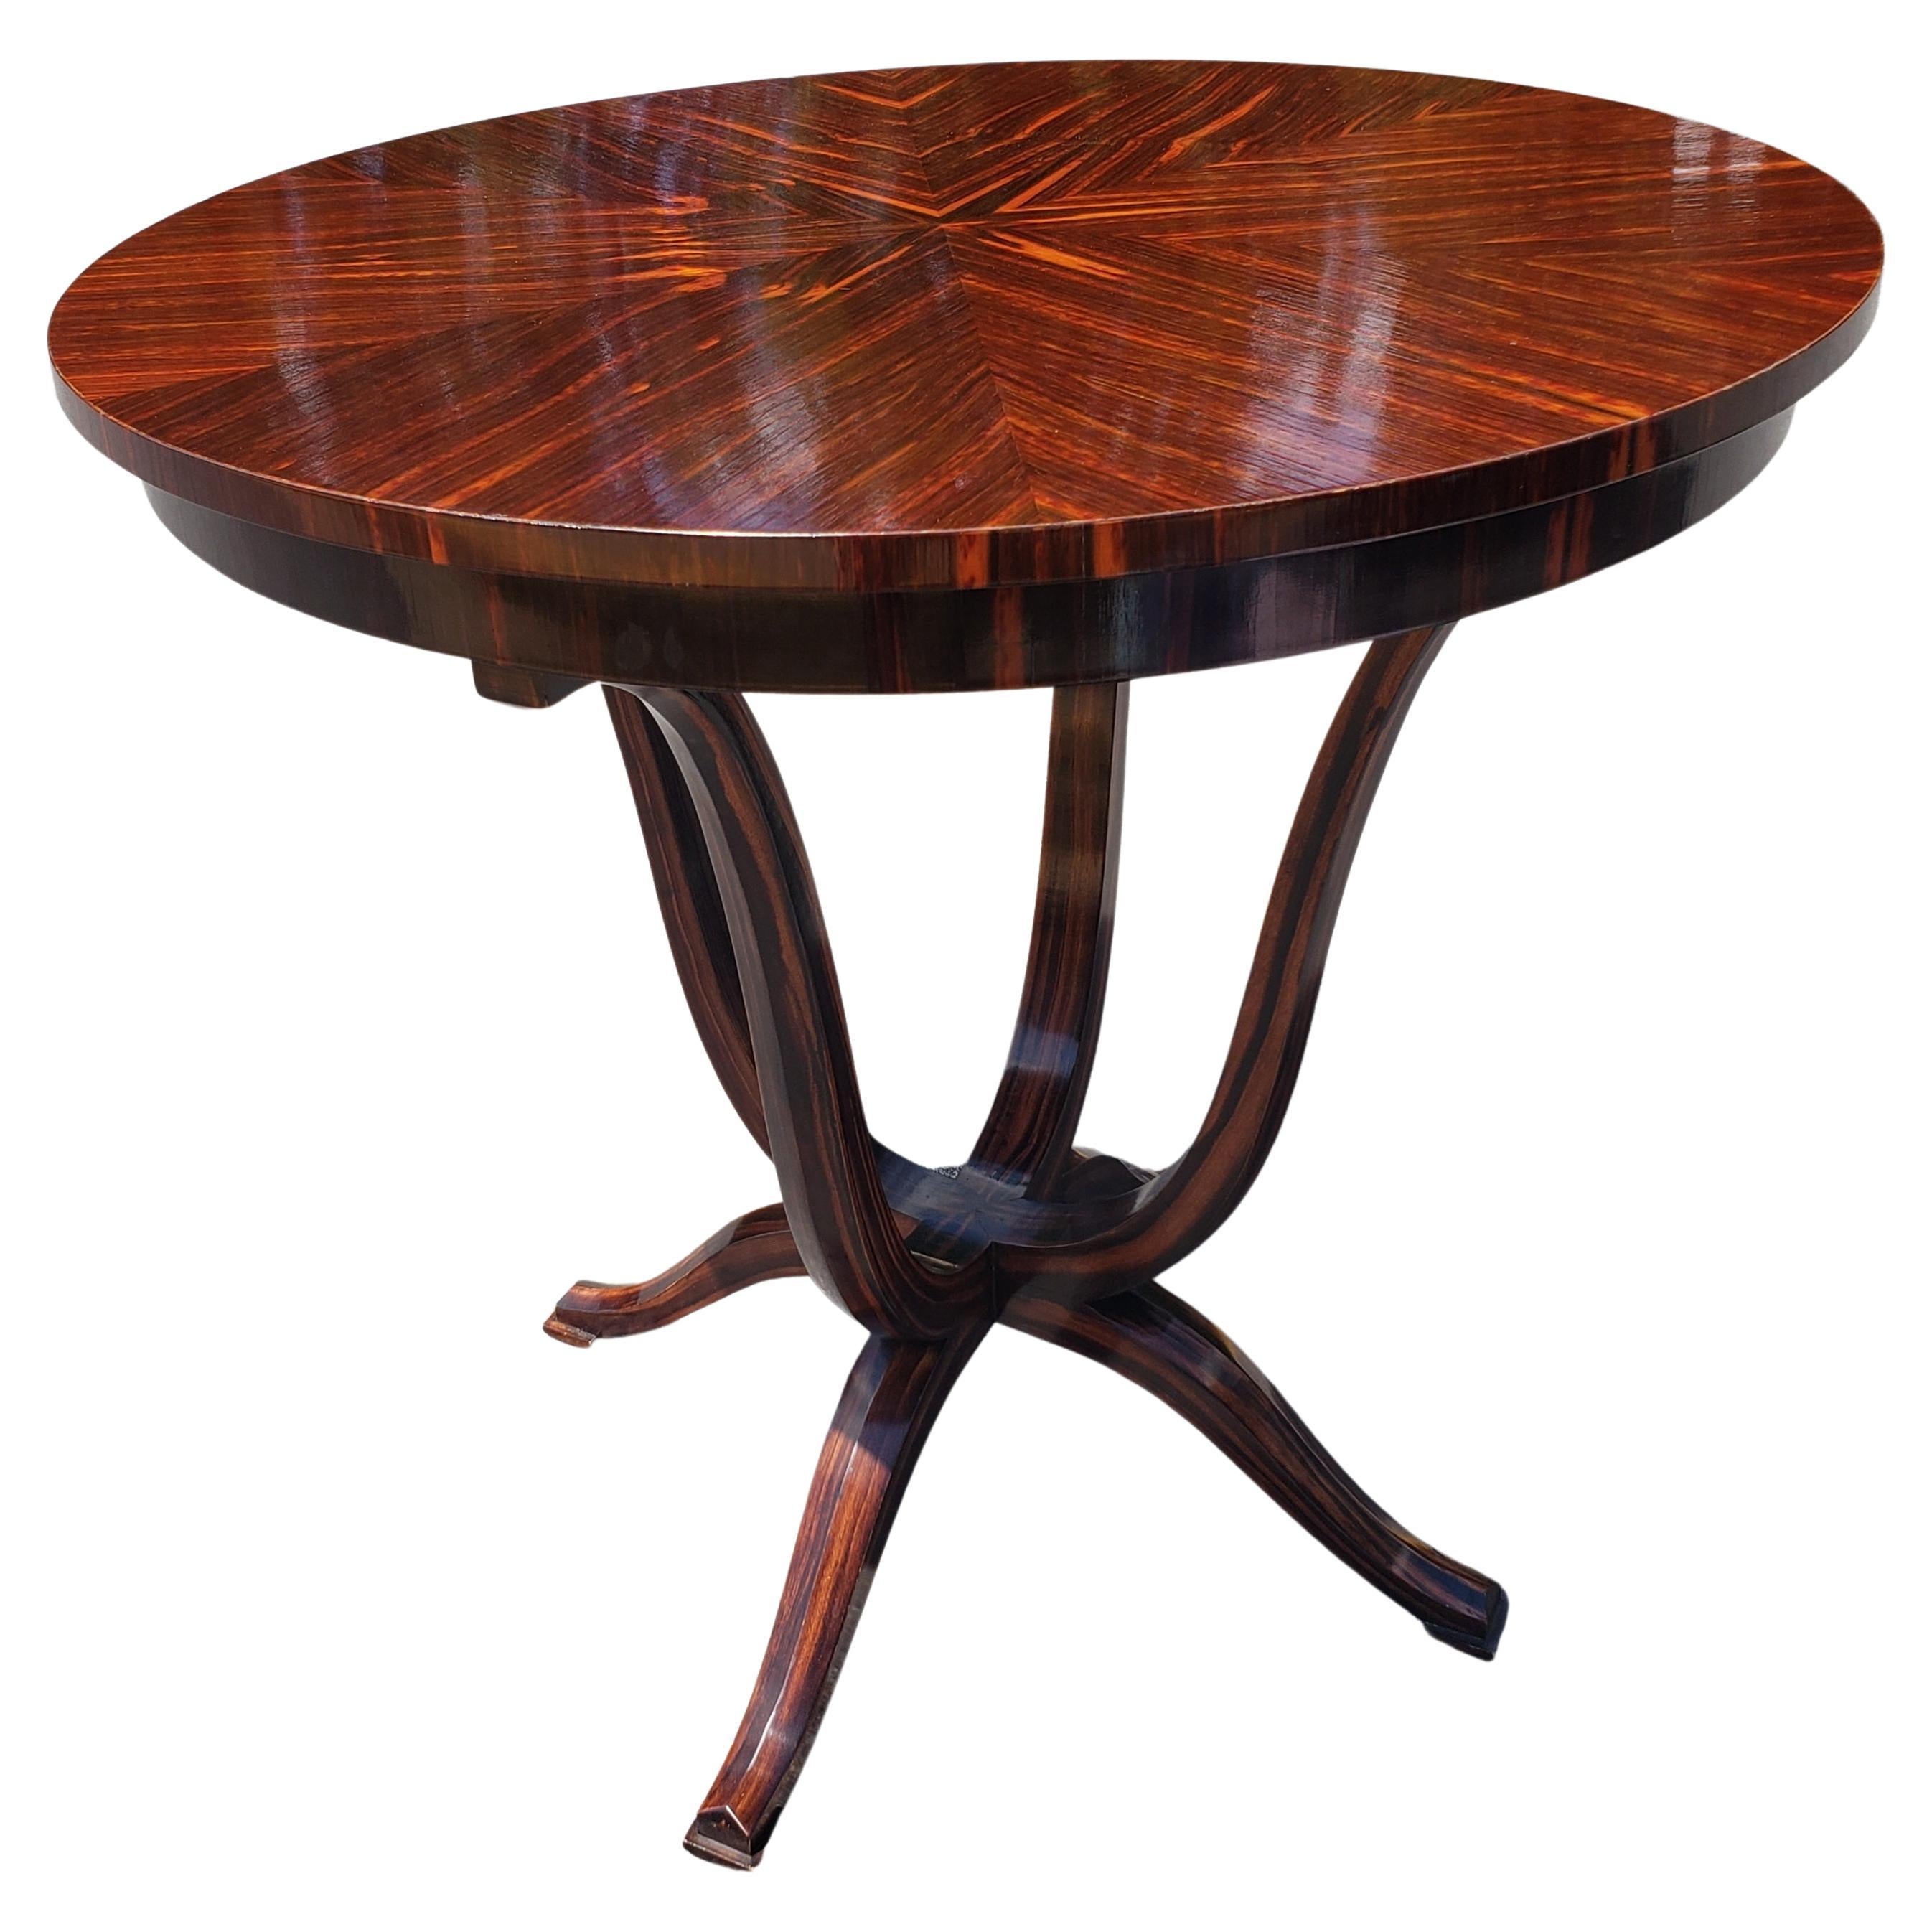 A beautiful late 20th century Art Deco style rosewood center table. Quad Legs and quad feet.
Very good vintage condition with marginal signs of use. Measures 31 inches in diameter and stands 30 inches tall.